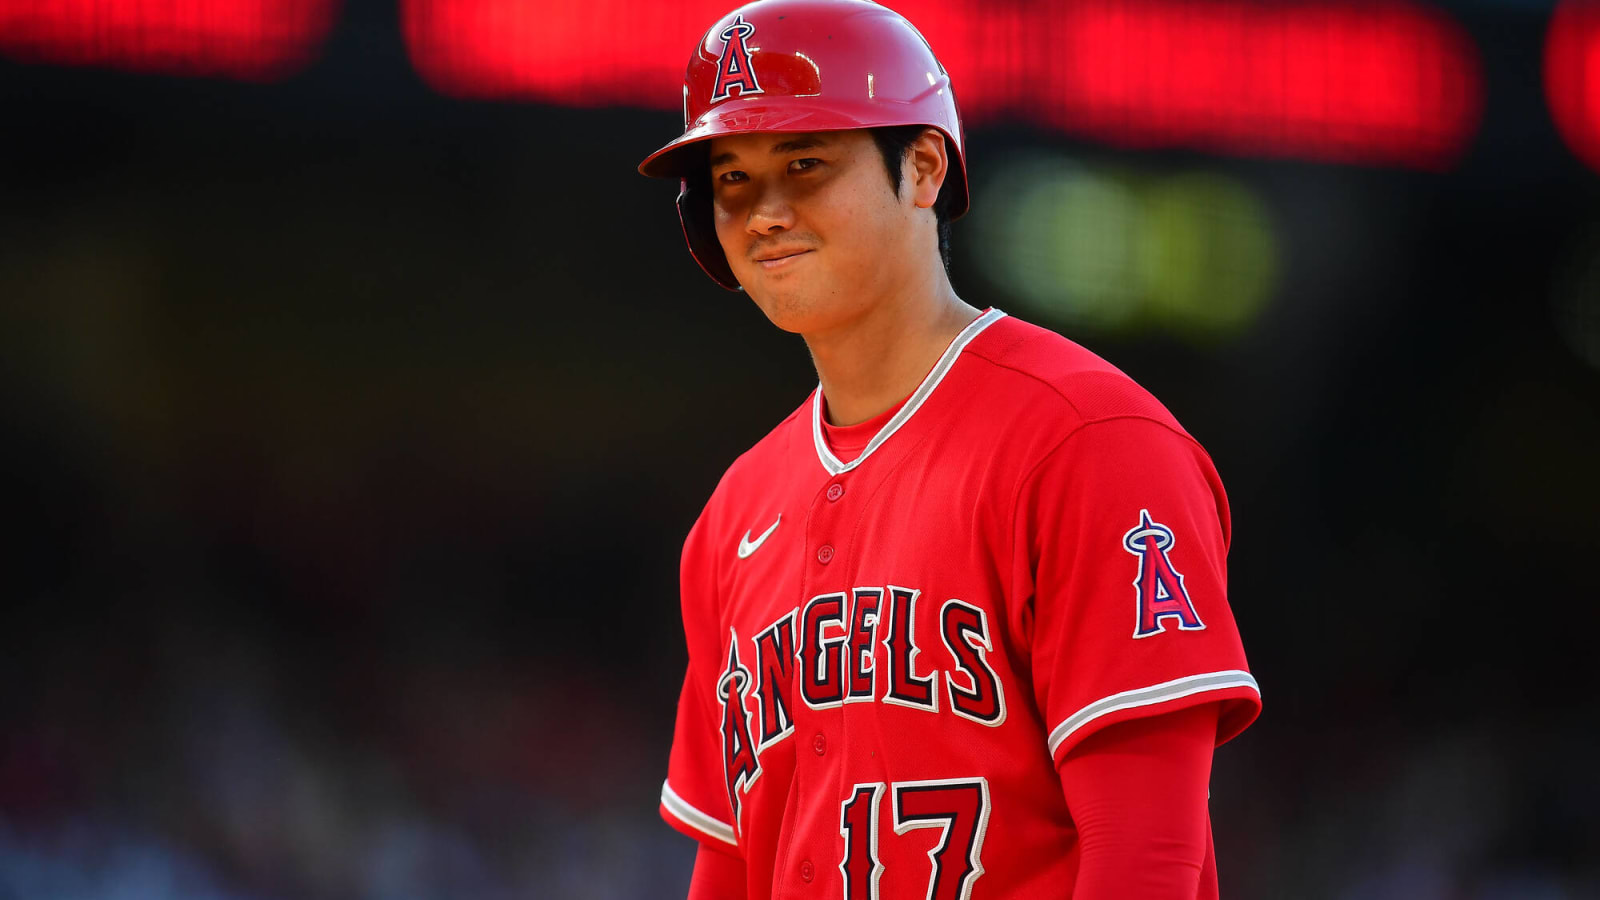 The Yankees could land Shohei Ohtani but it comes with a huge risk